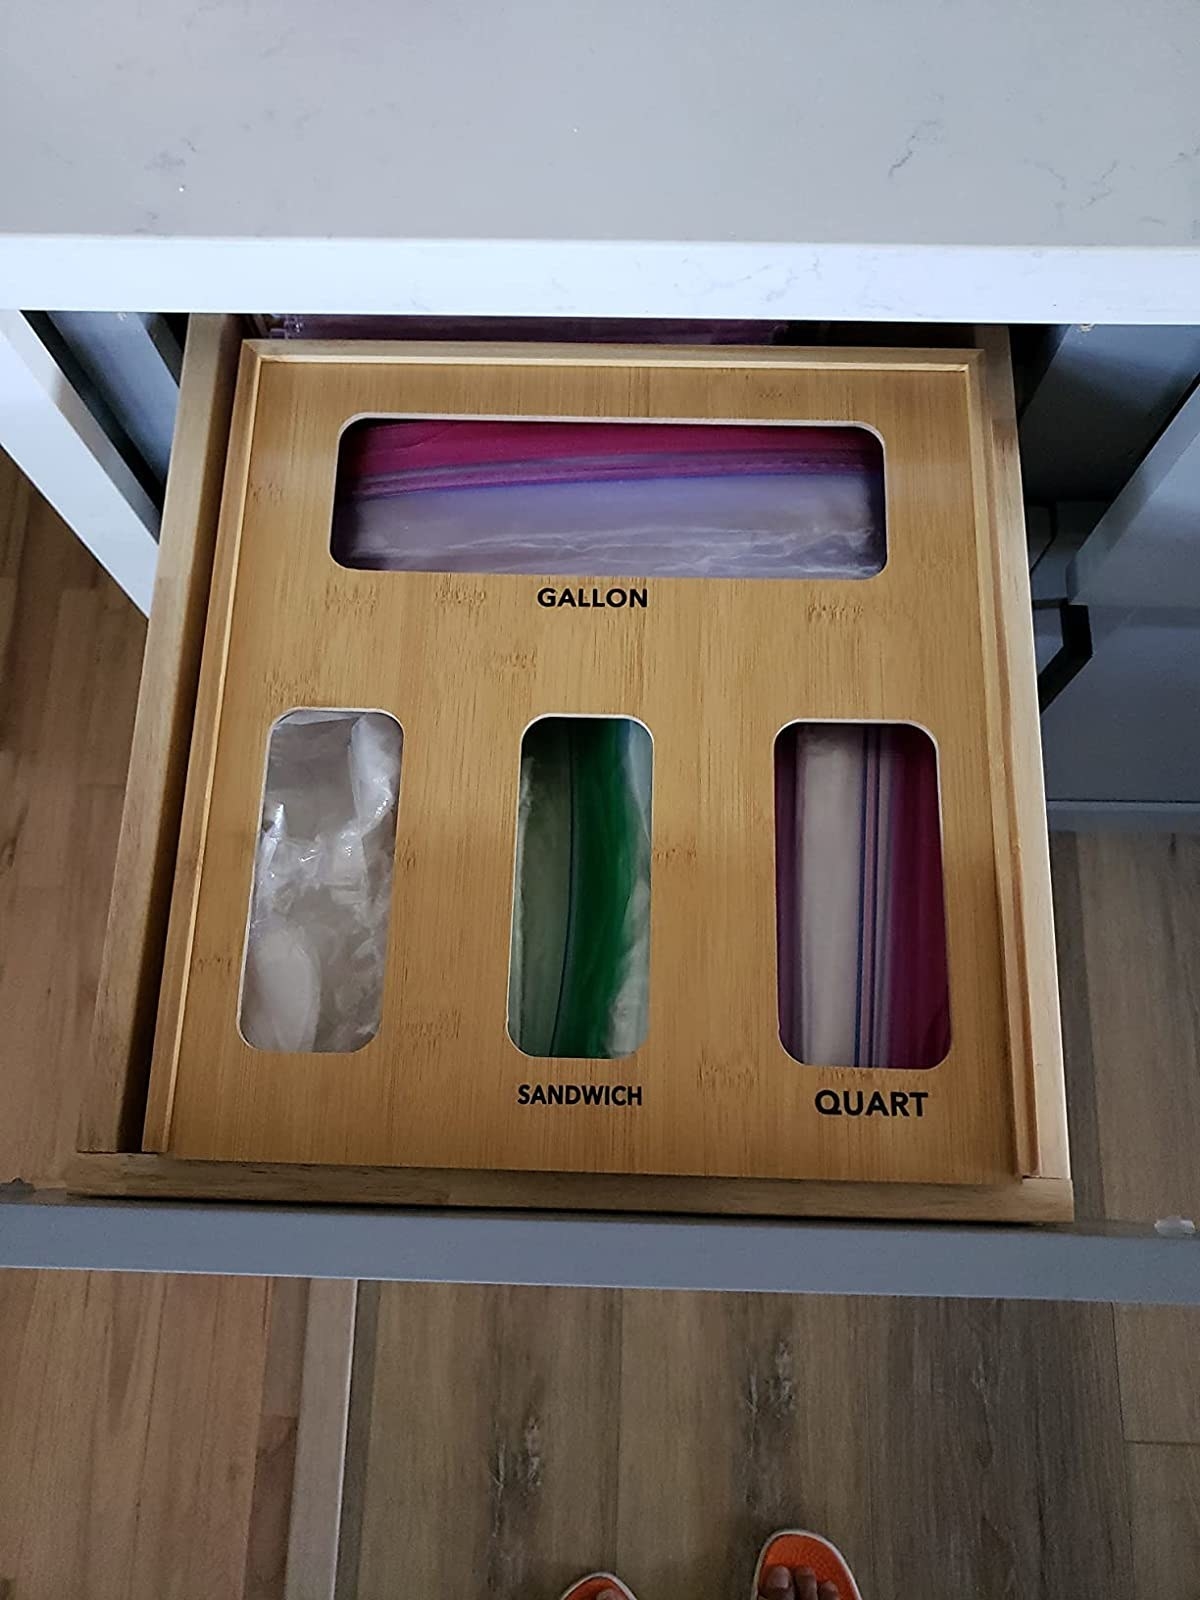 Reviewer image of drawer organizer filled with ziplock bags